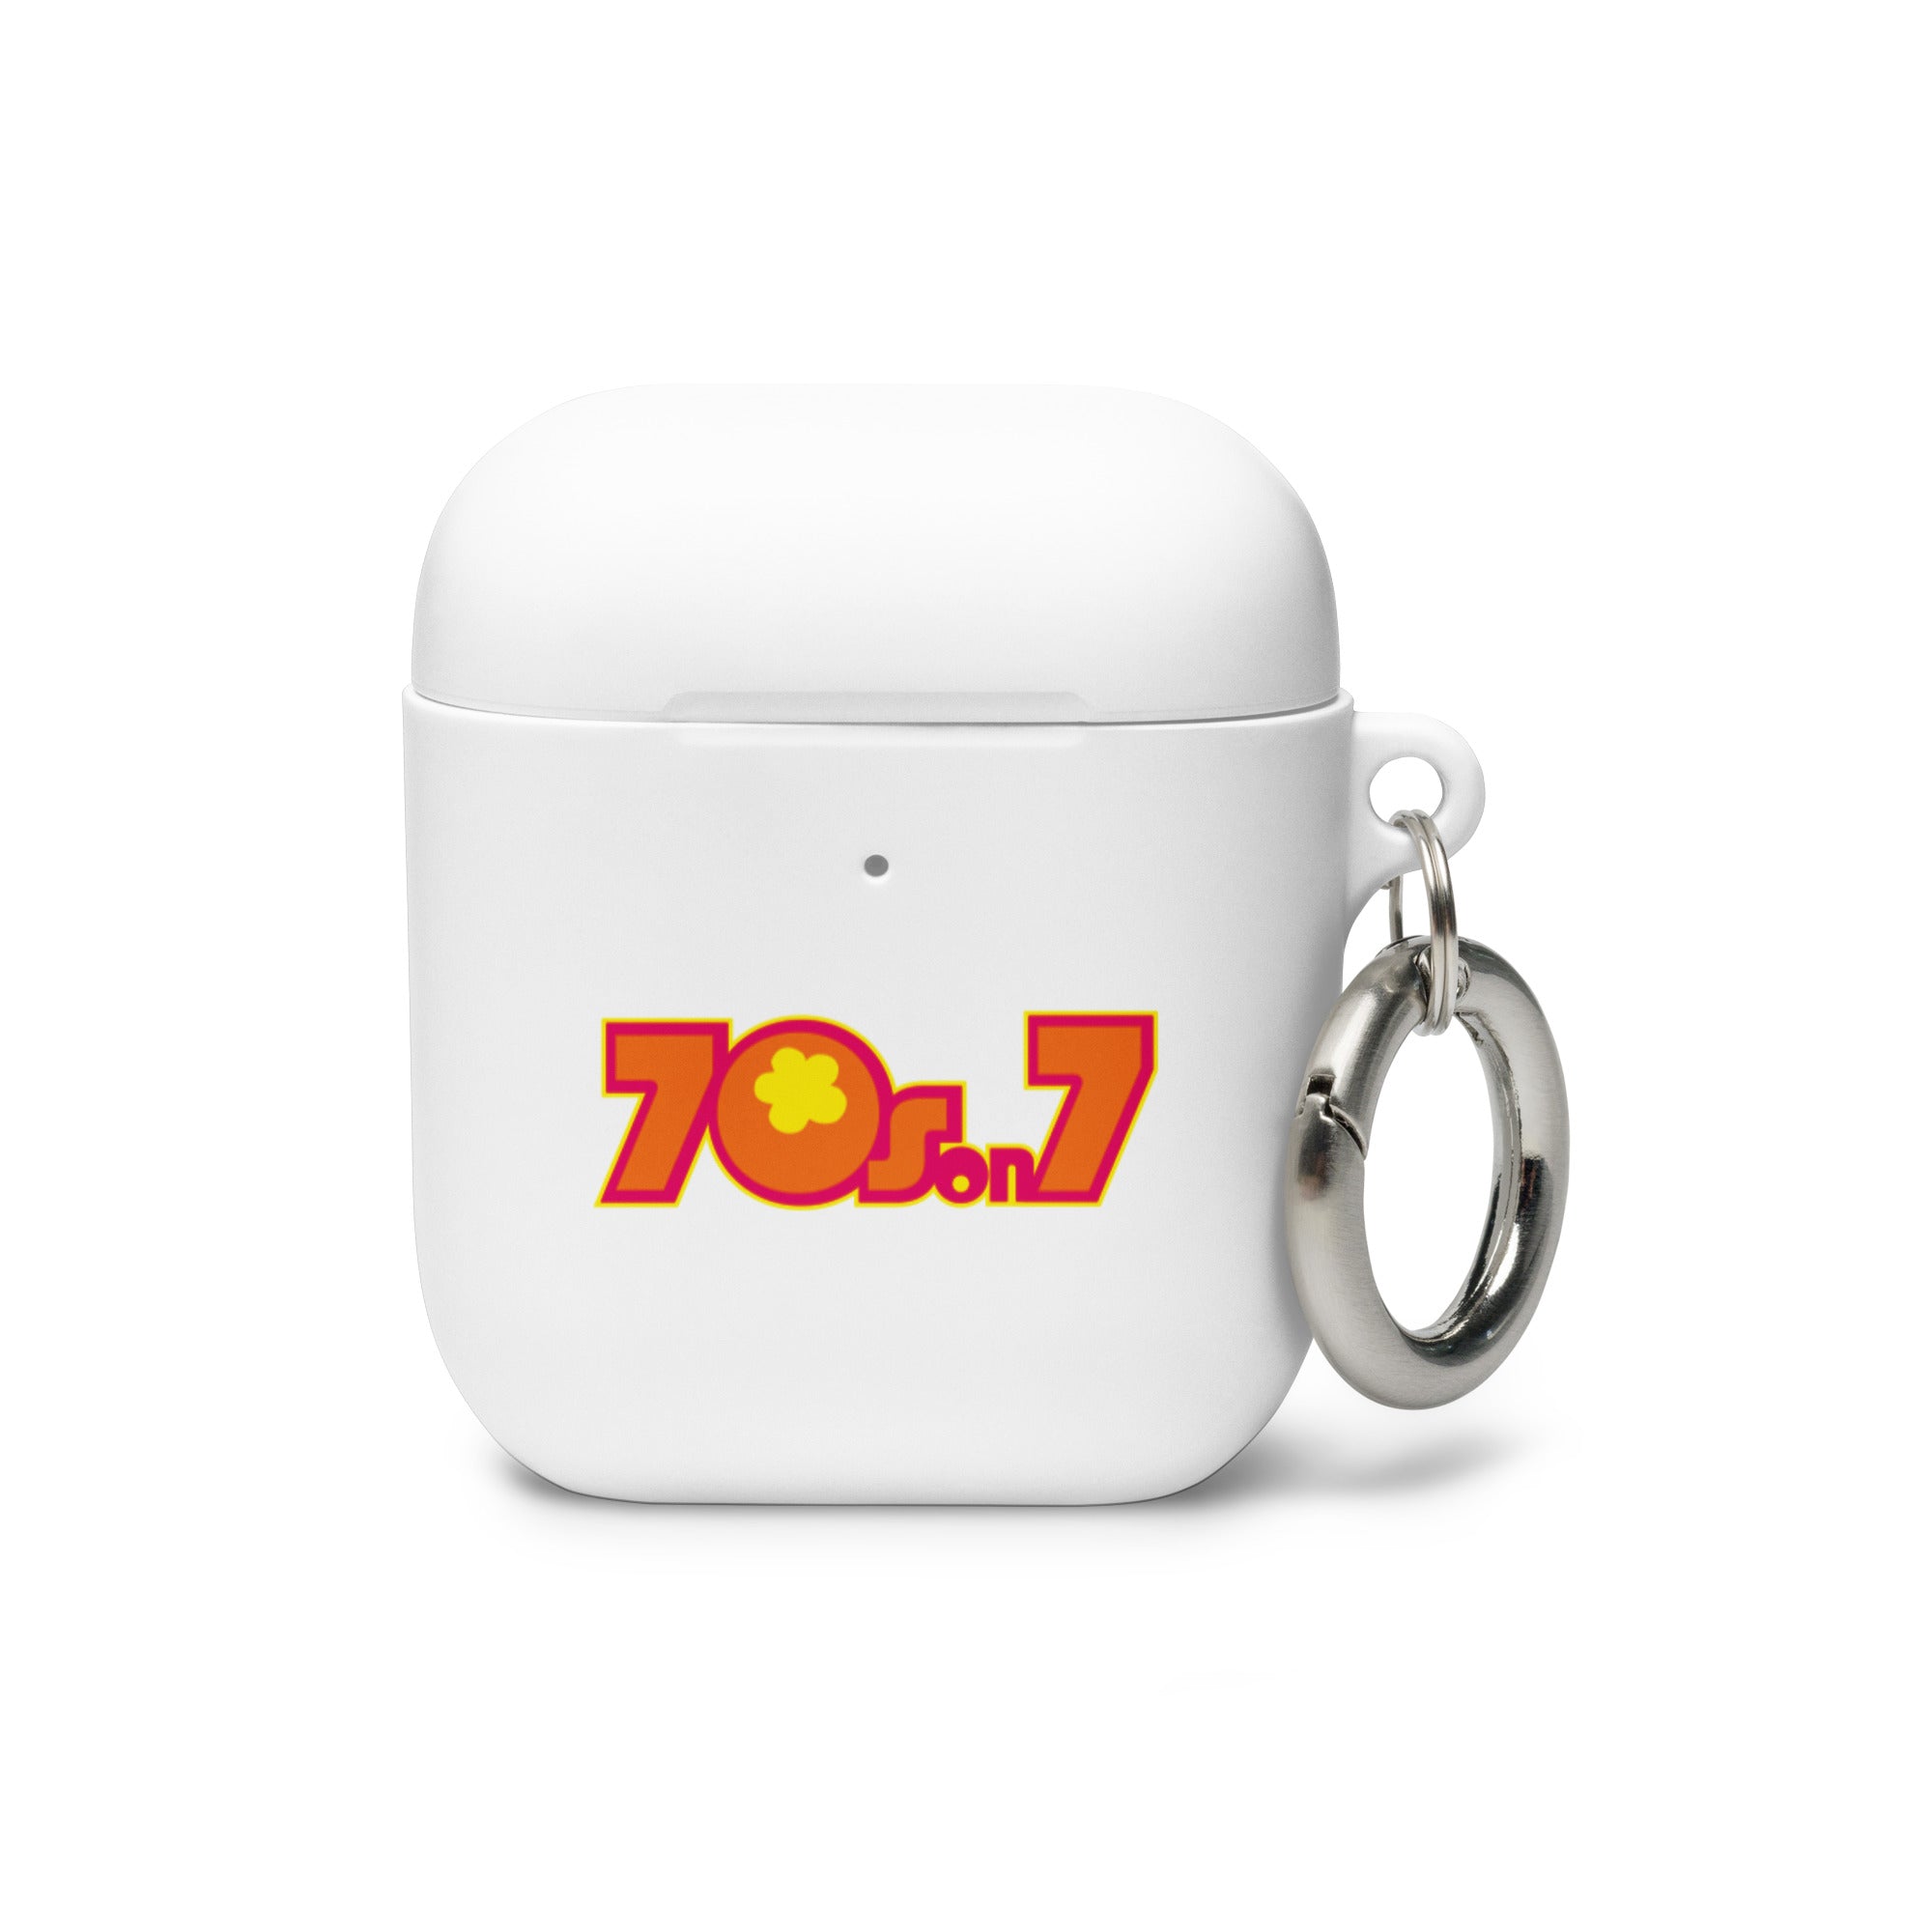 70s on 7: AirPods® Case Cover